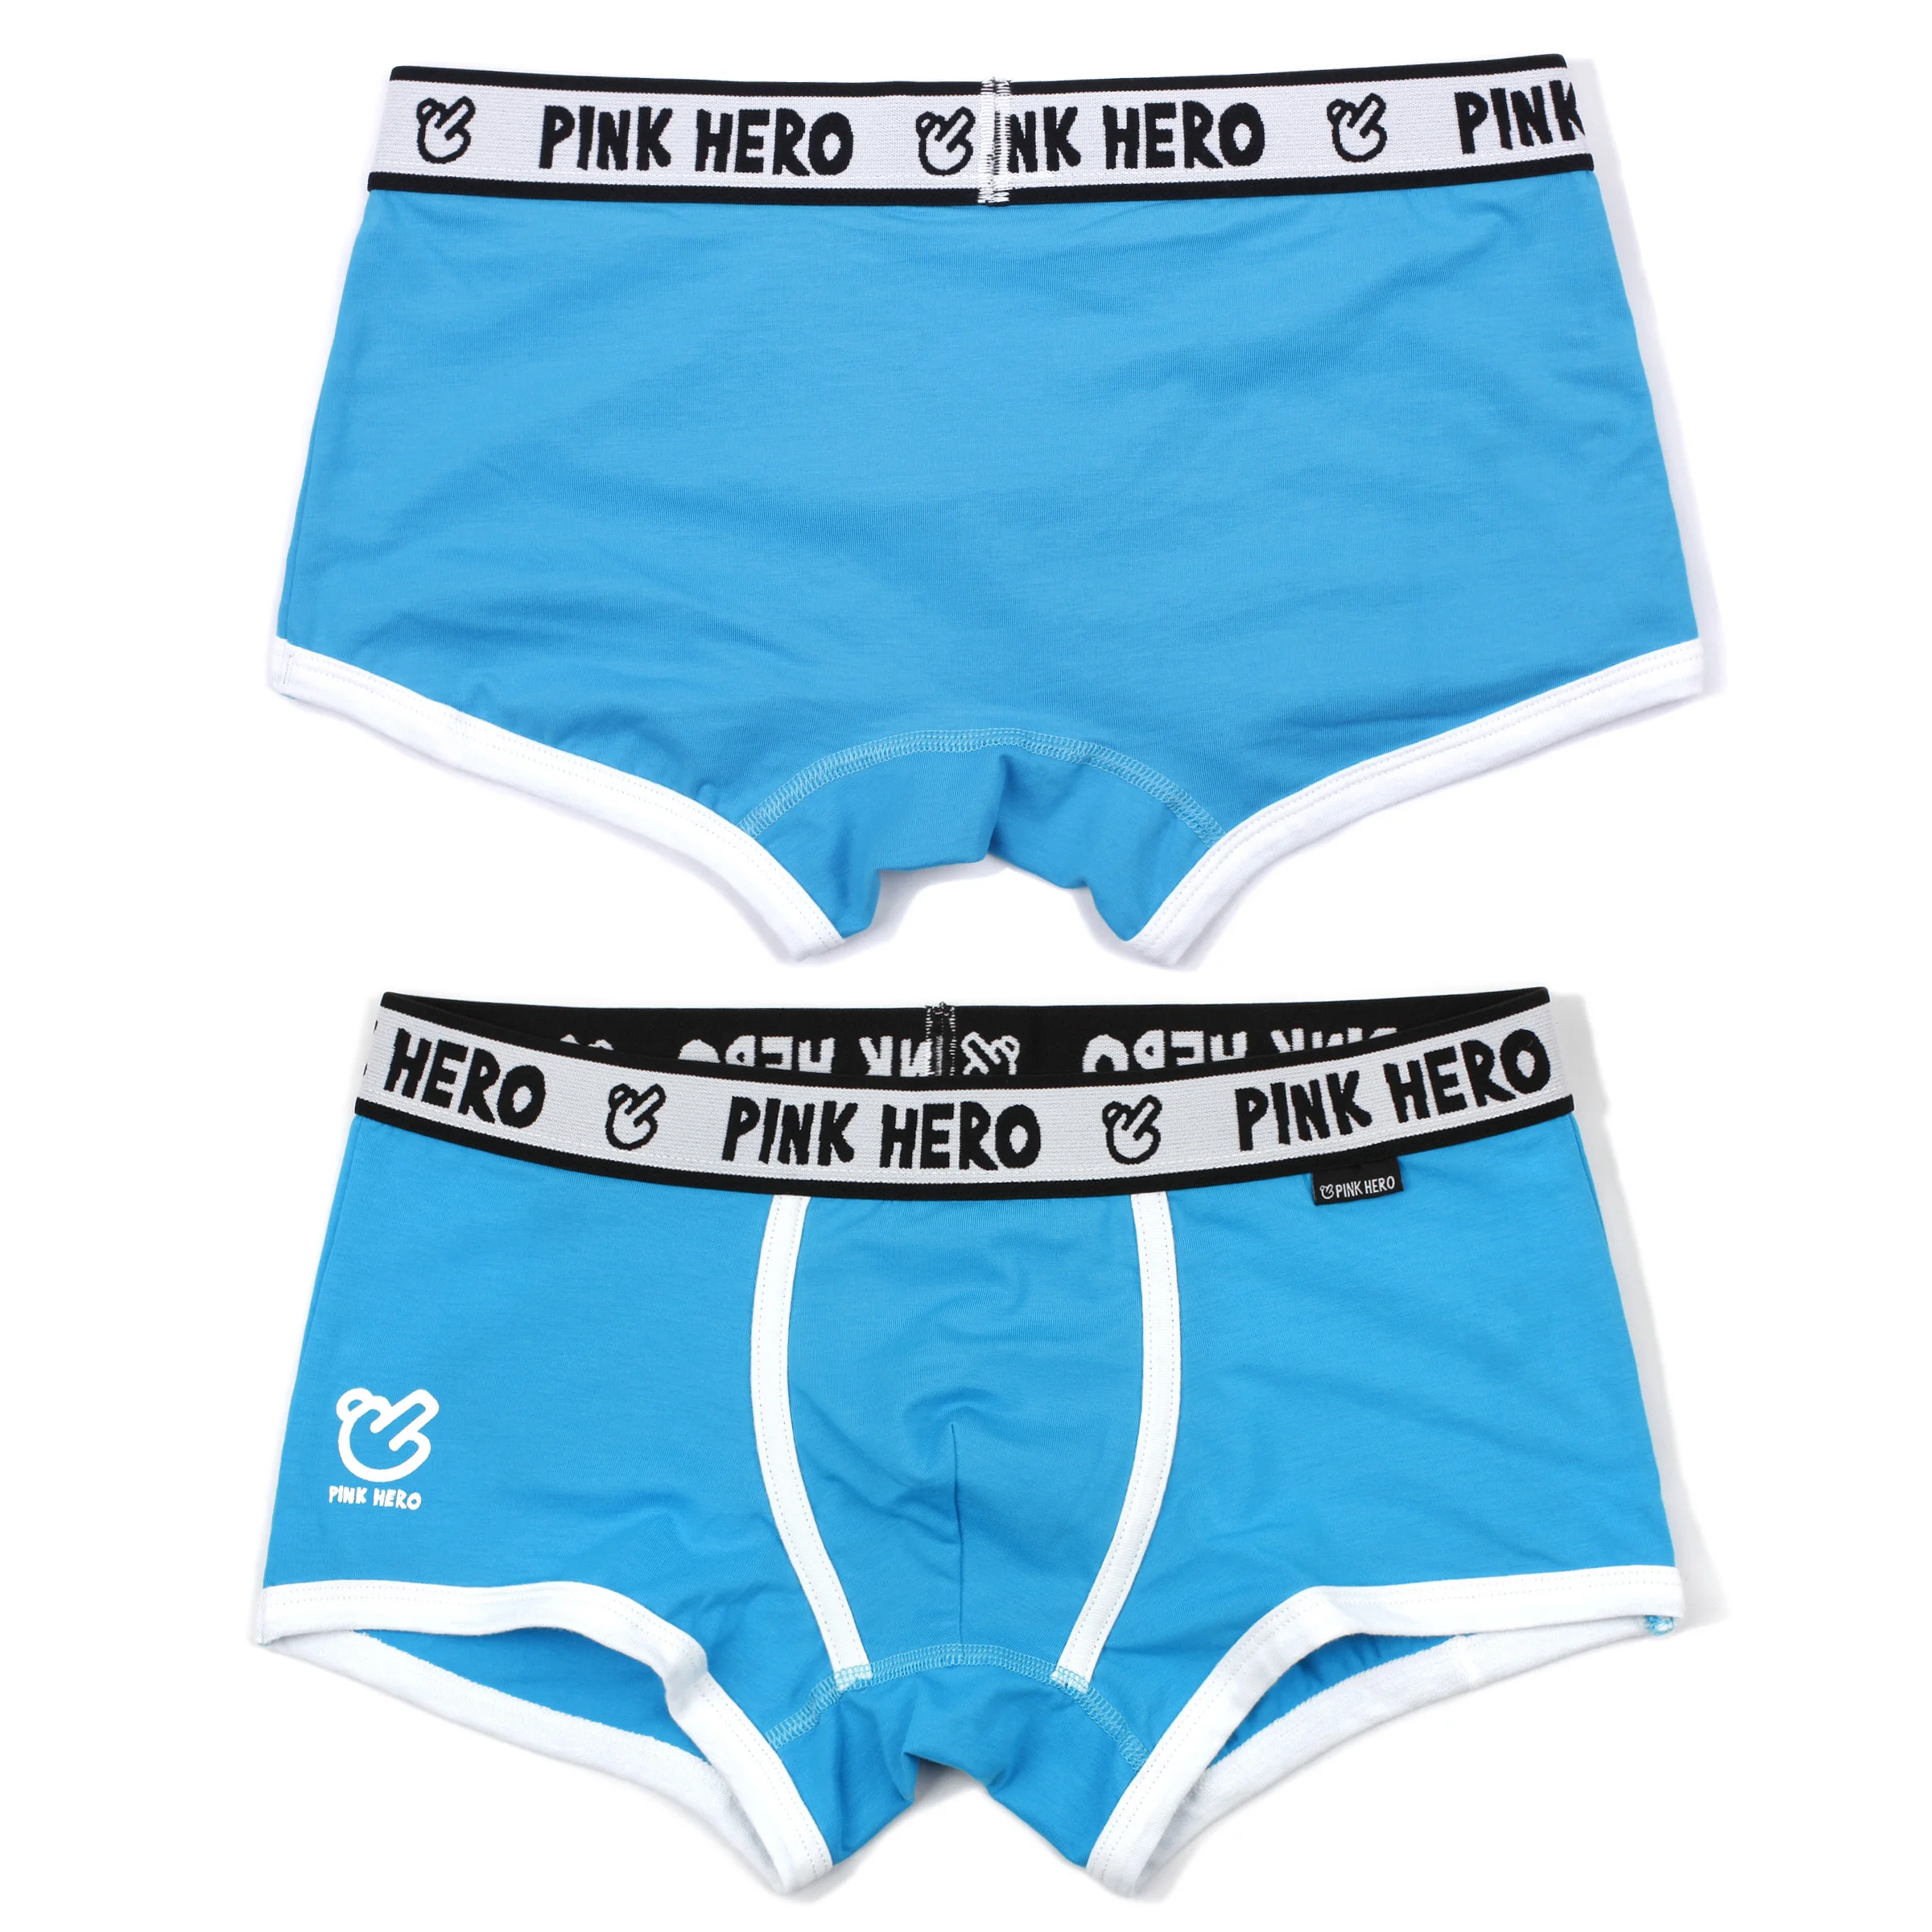 Pink Heroes Classic Men Underwear Boxers High Quality Cotton Male Panties comfortable Cost-effective M/L/XL/XXL images - 6